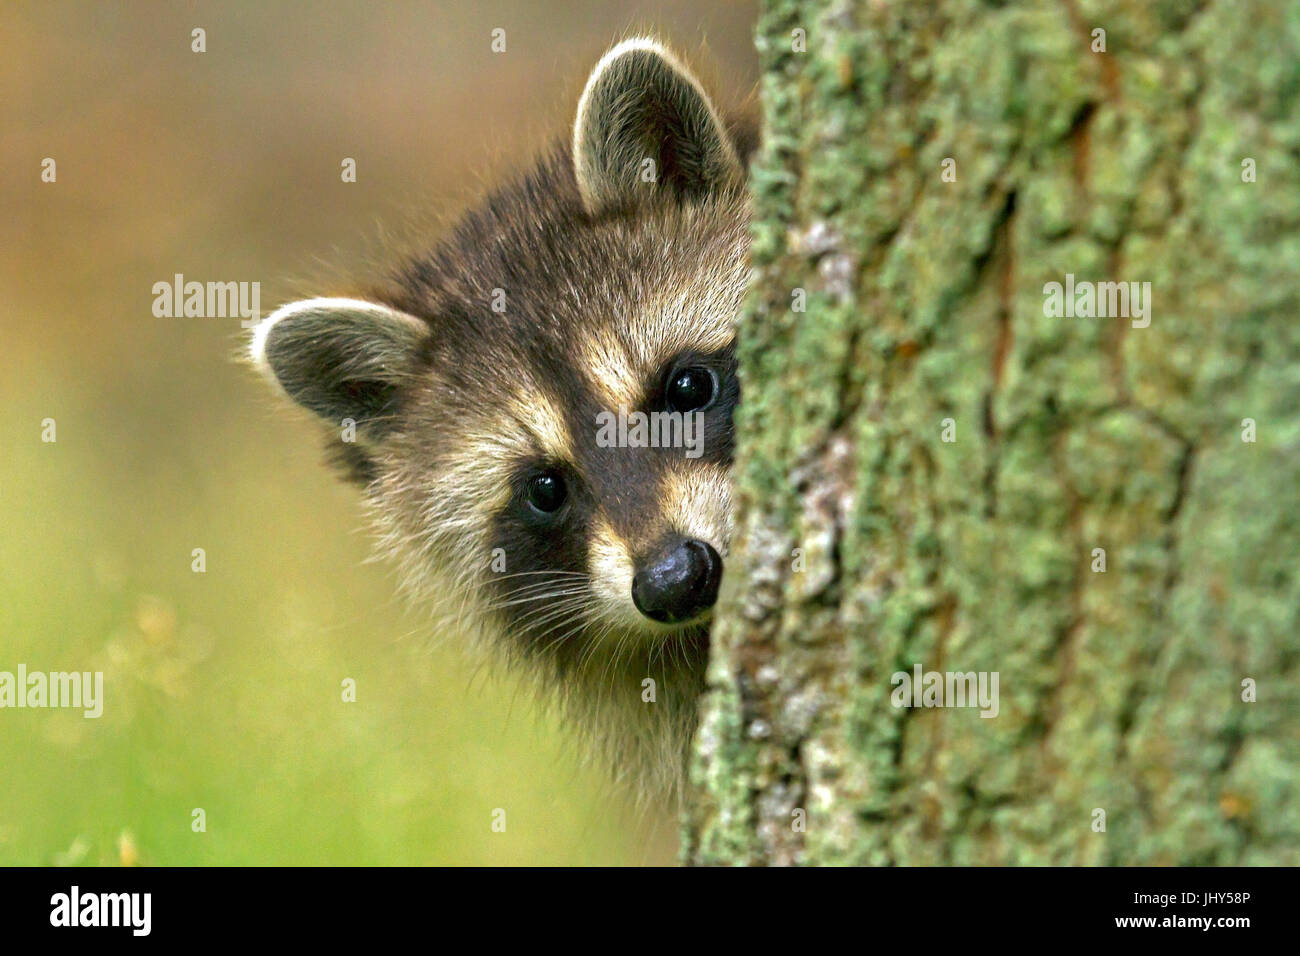 Young racoon, Junger Waschbär Stock Photo